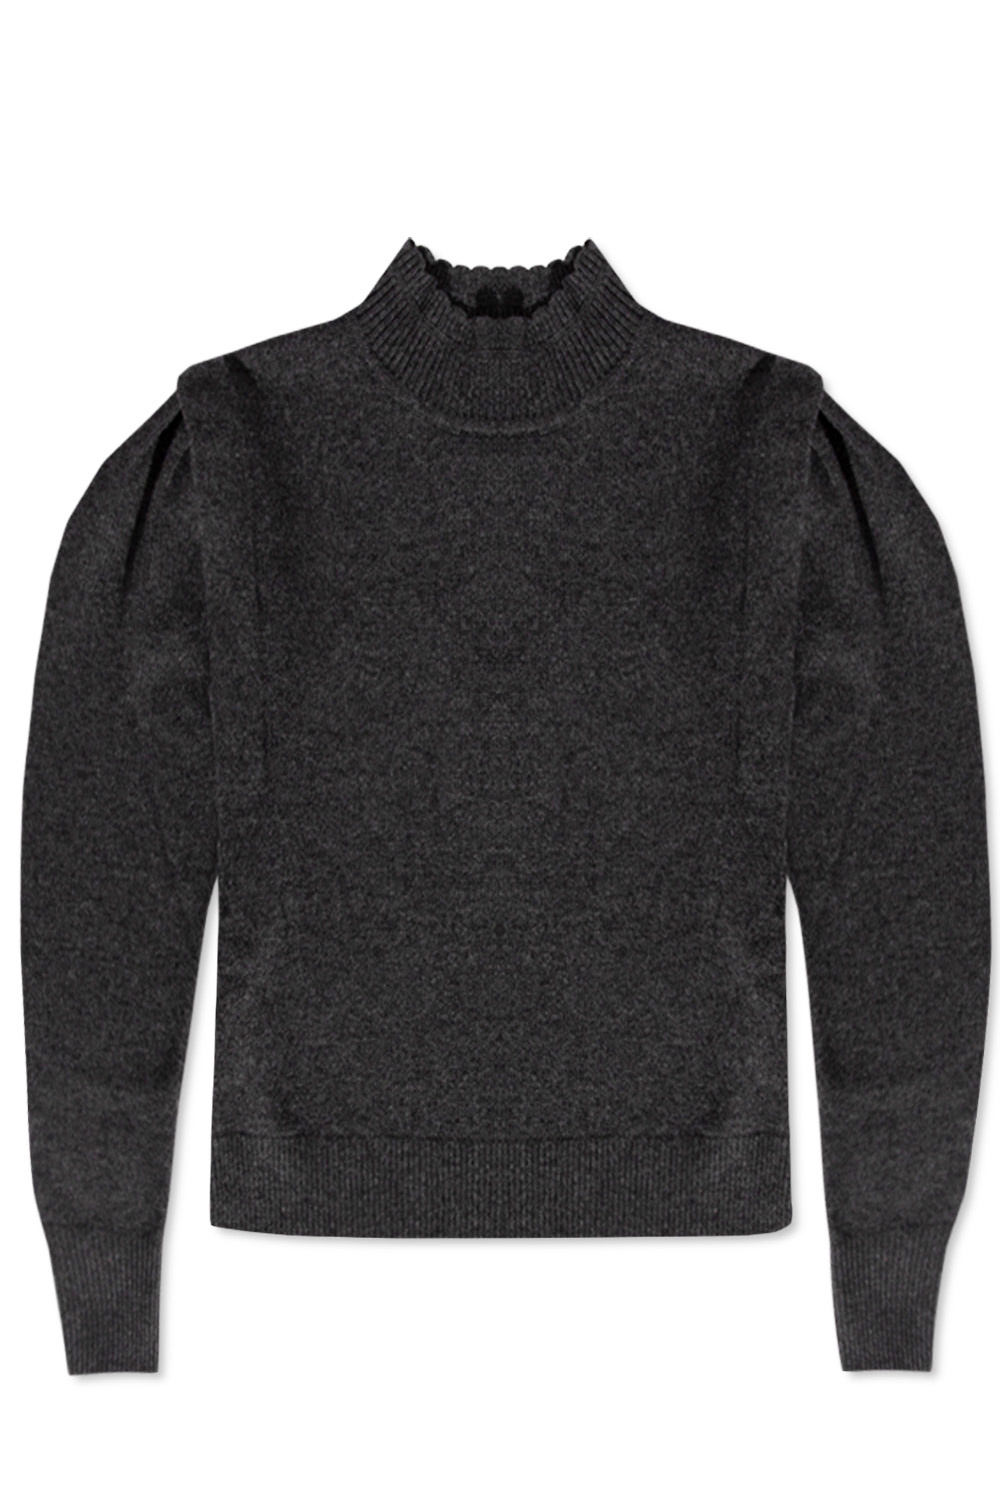 Isabel Marant Etoile sweater date with stand-up collar